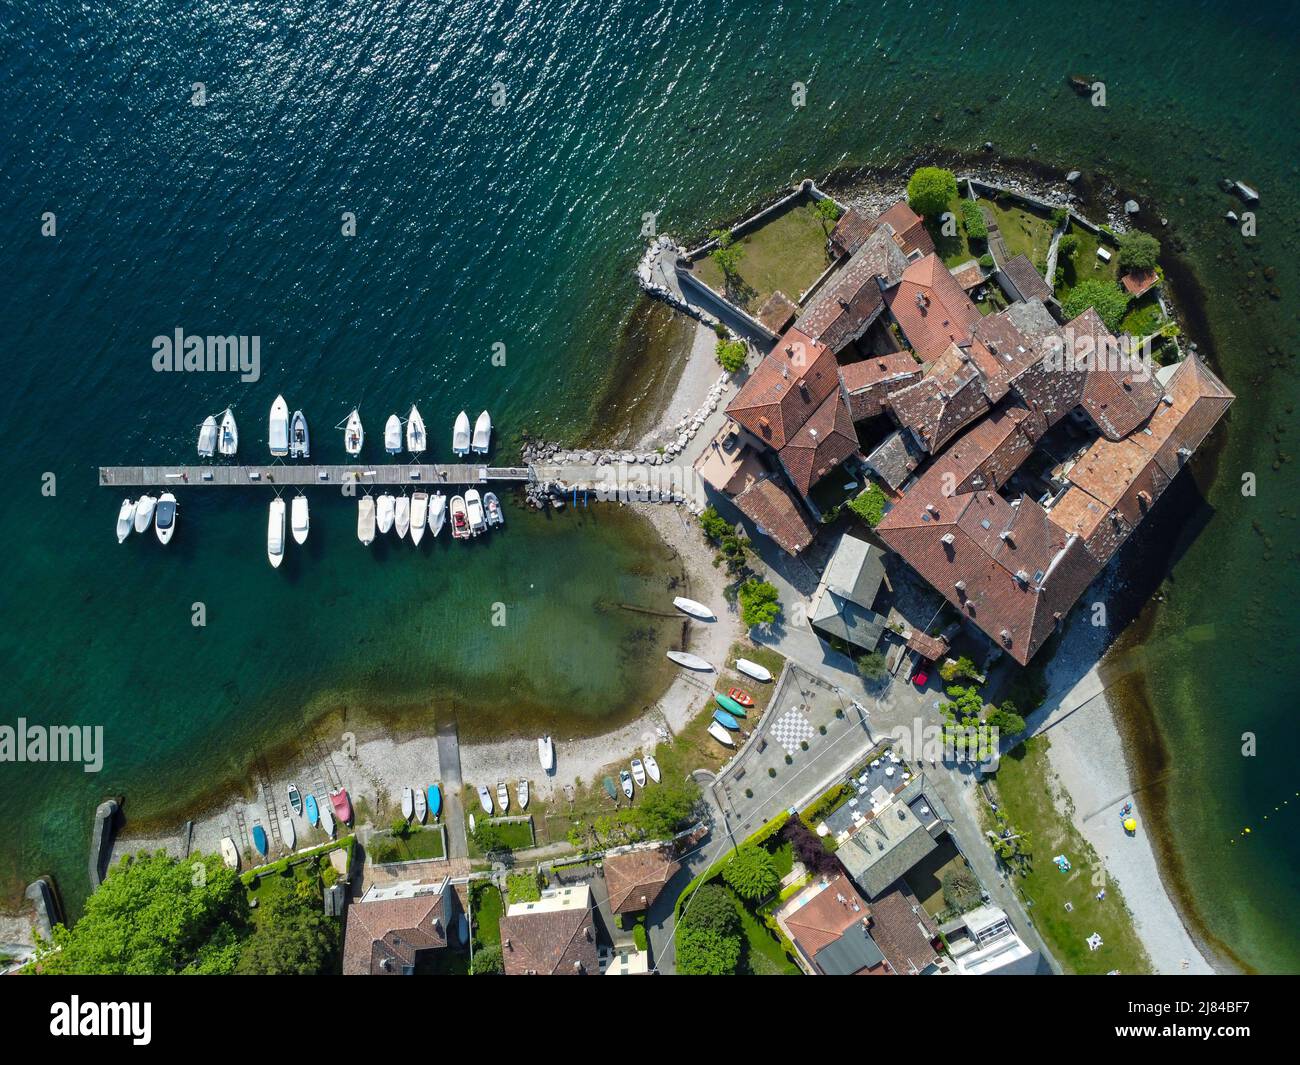 Aerial view of Lierna, a village on Lake Como Stock Photo